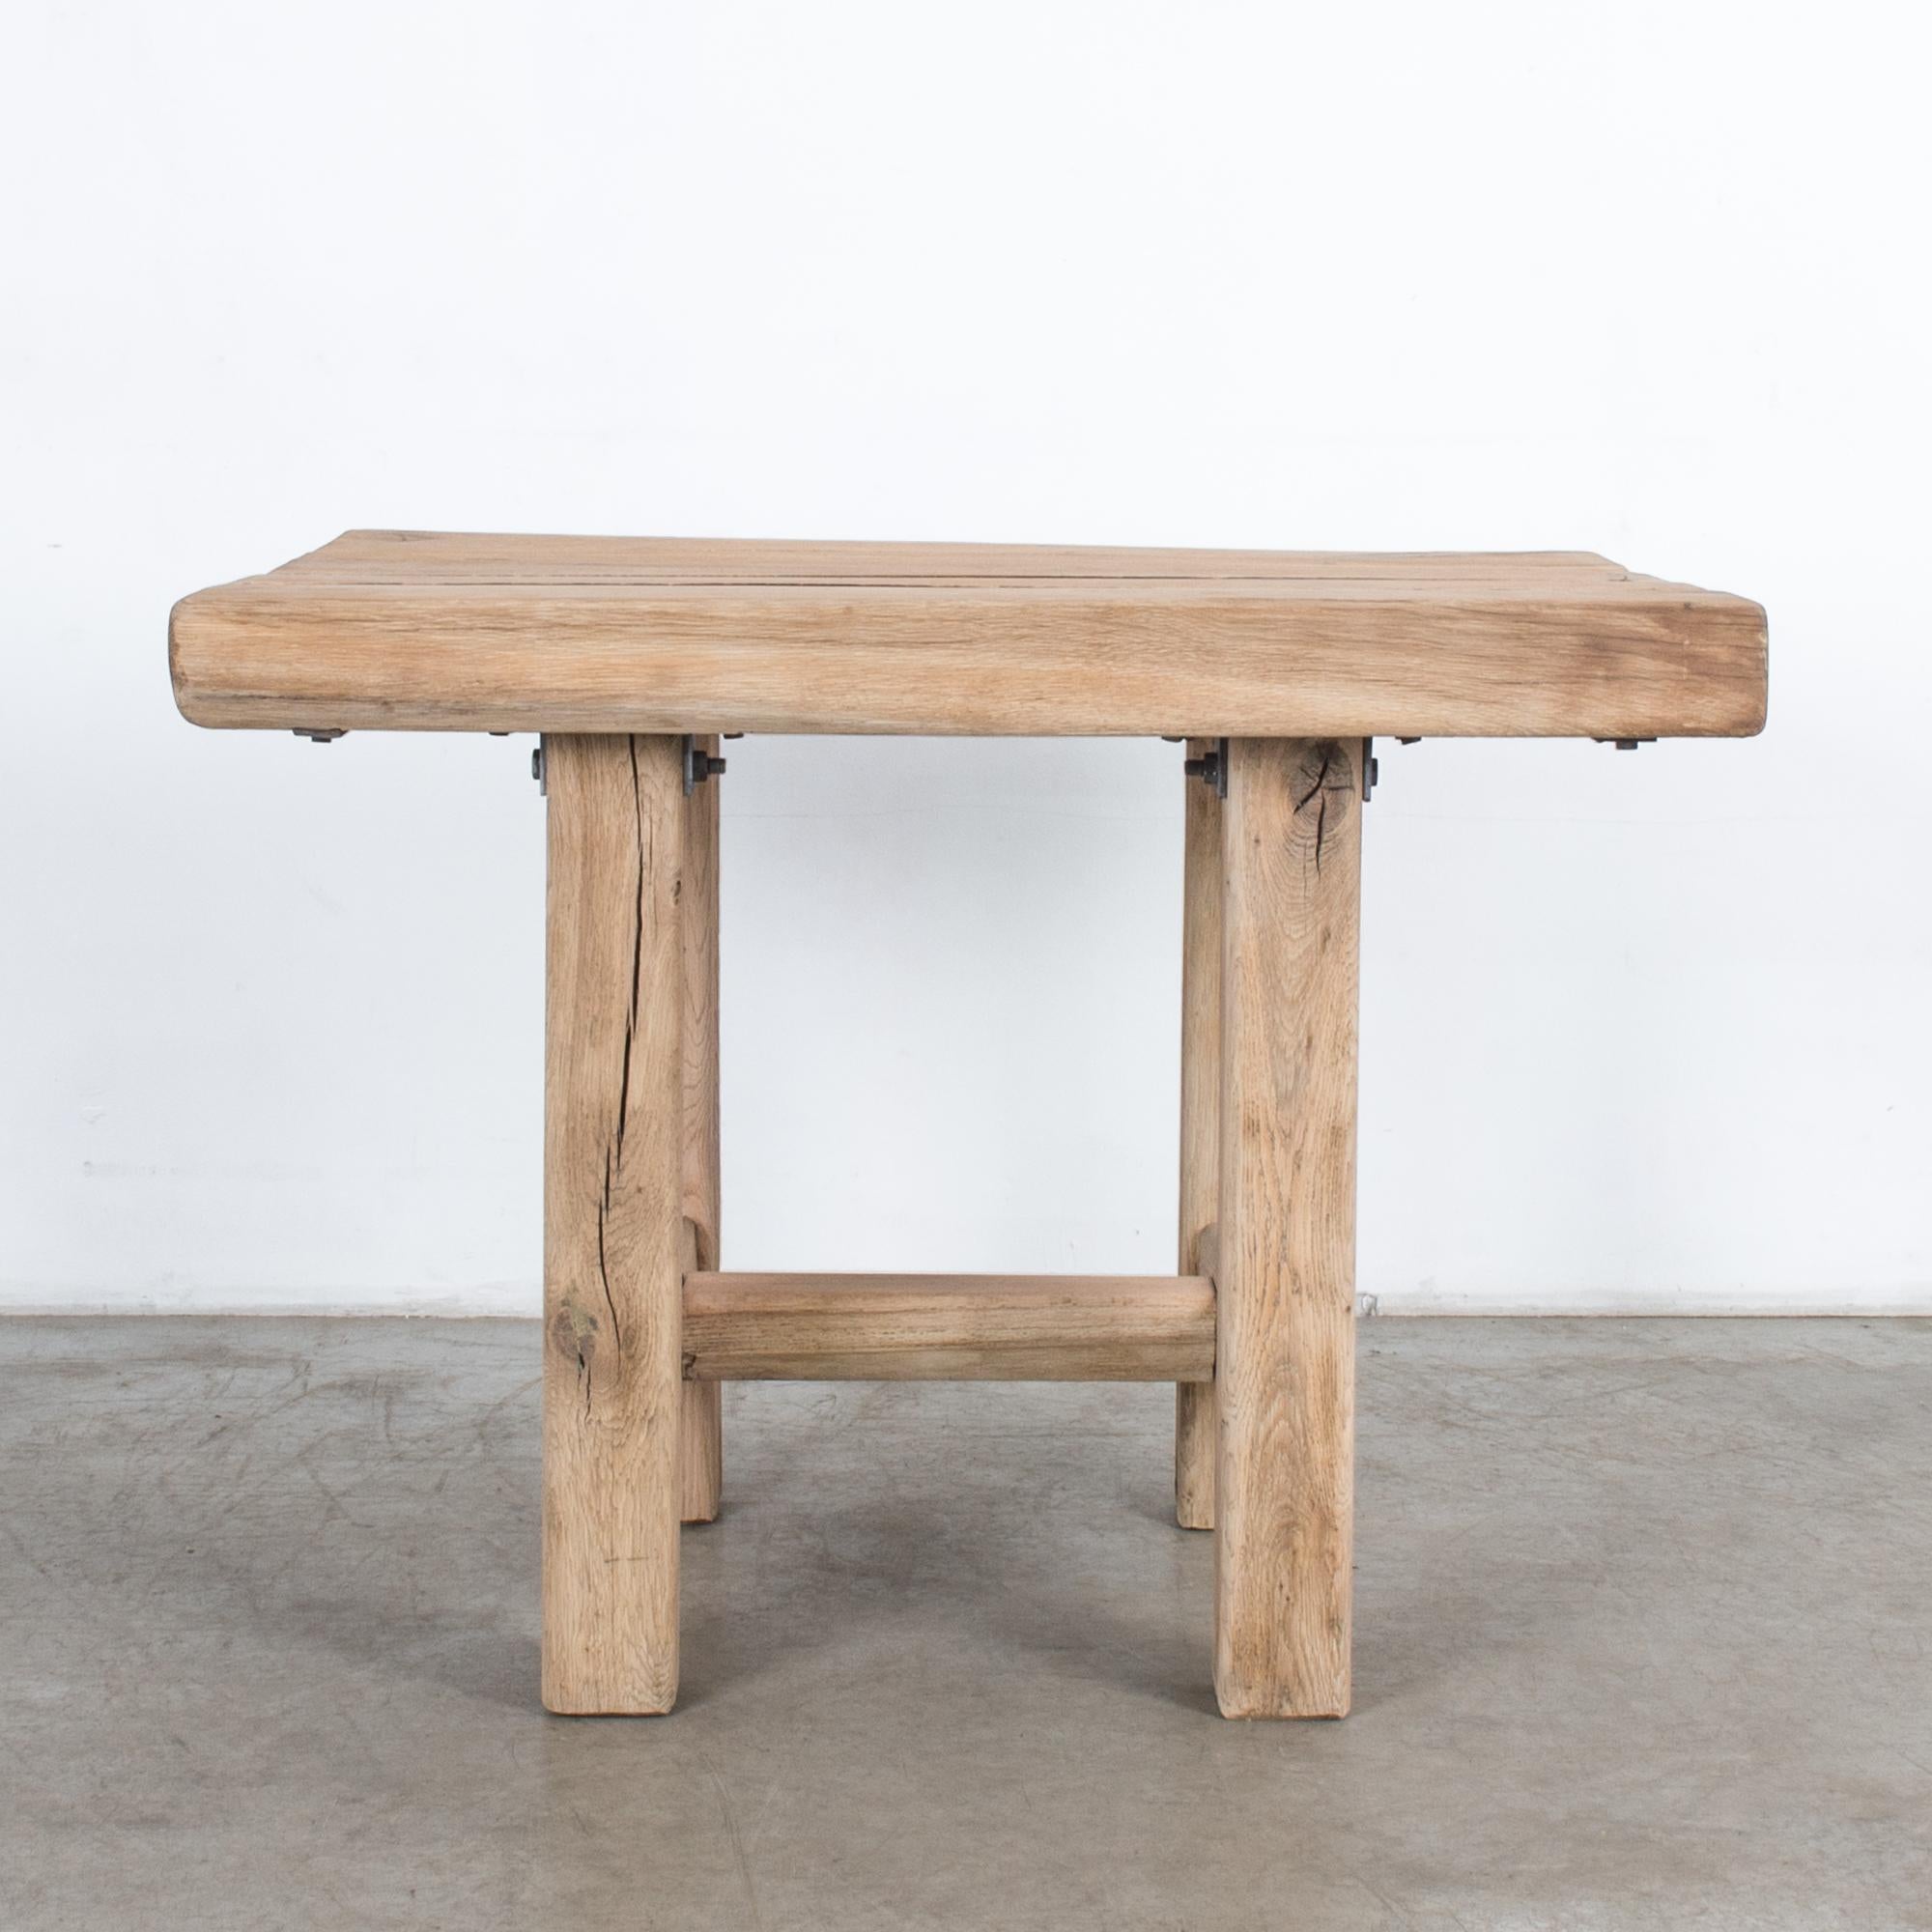 This sturdy and rustic wooden side table was made in Belgium, circa 1970. The table top consists of four panels and is supported on four angular legs with an H-stretcher base. The wood grain rings and cracks add charm and character to this table.